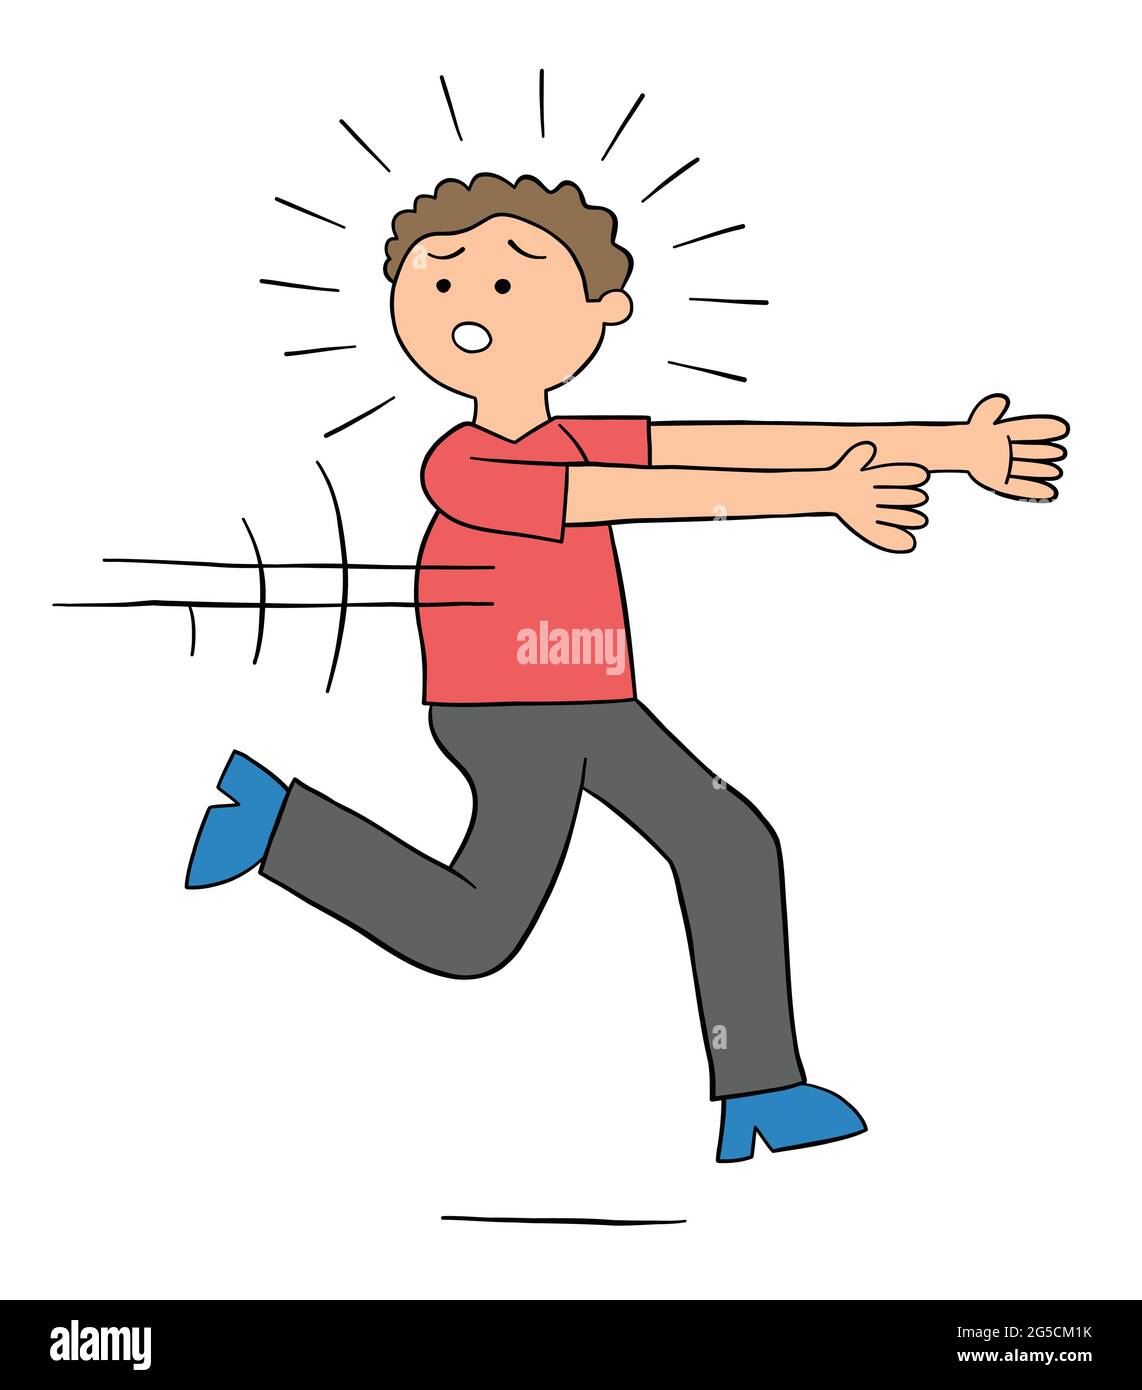 Cartoon man is afraid and runs away, vector illustration. Colored and black outlines. Stock Vector